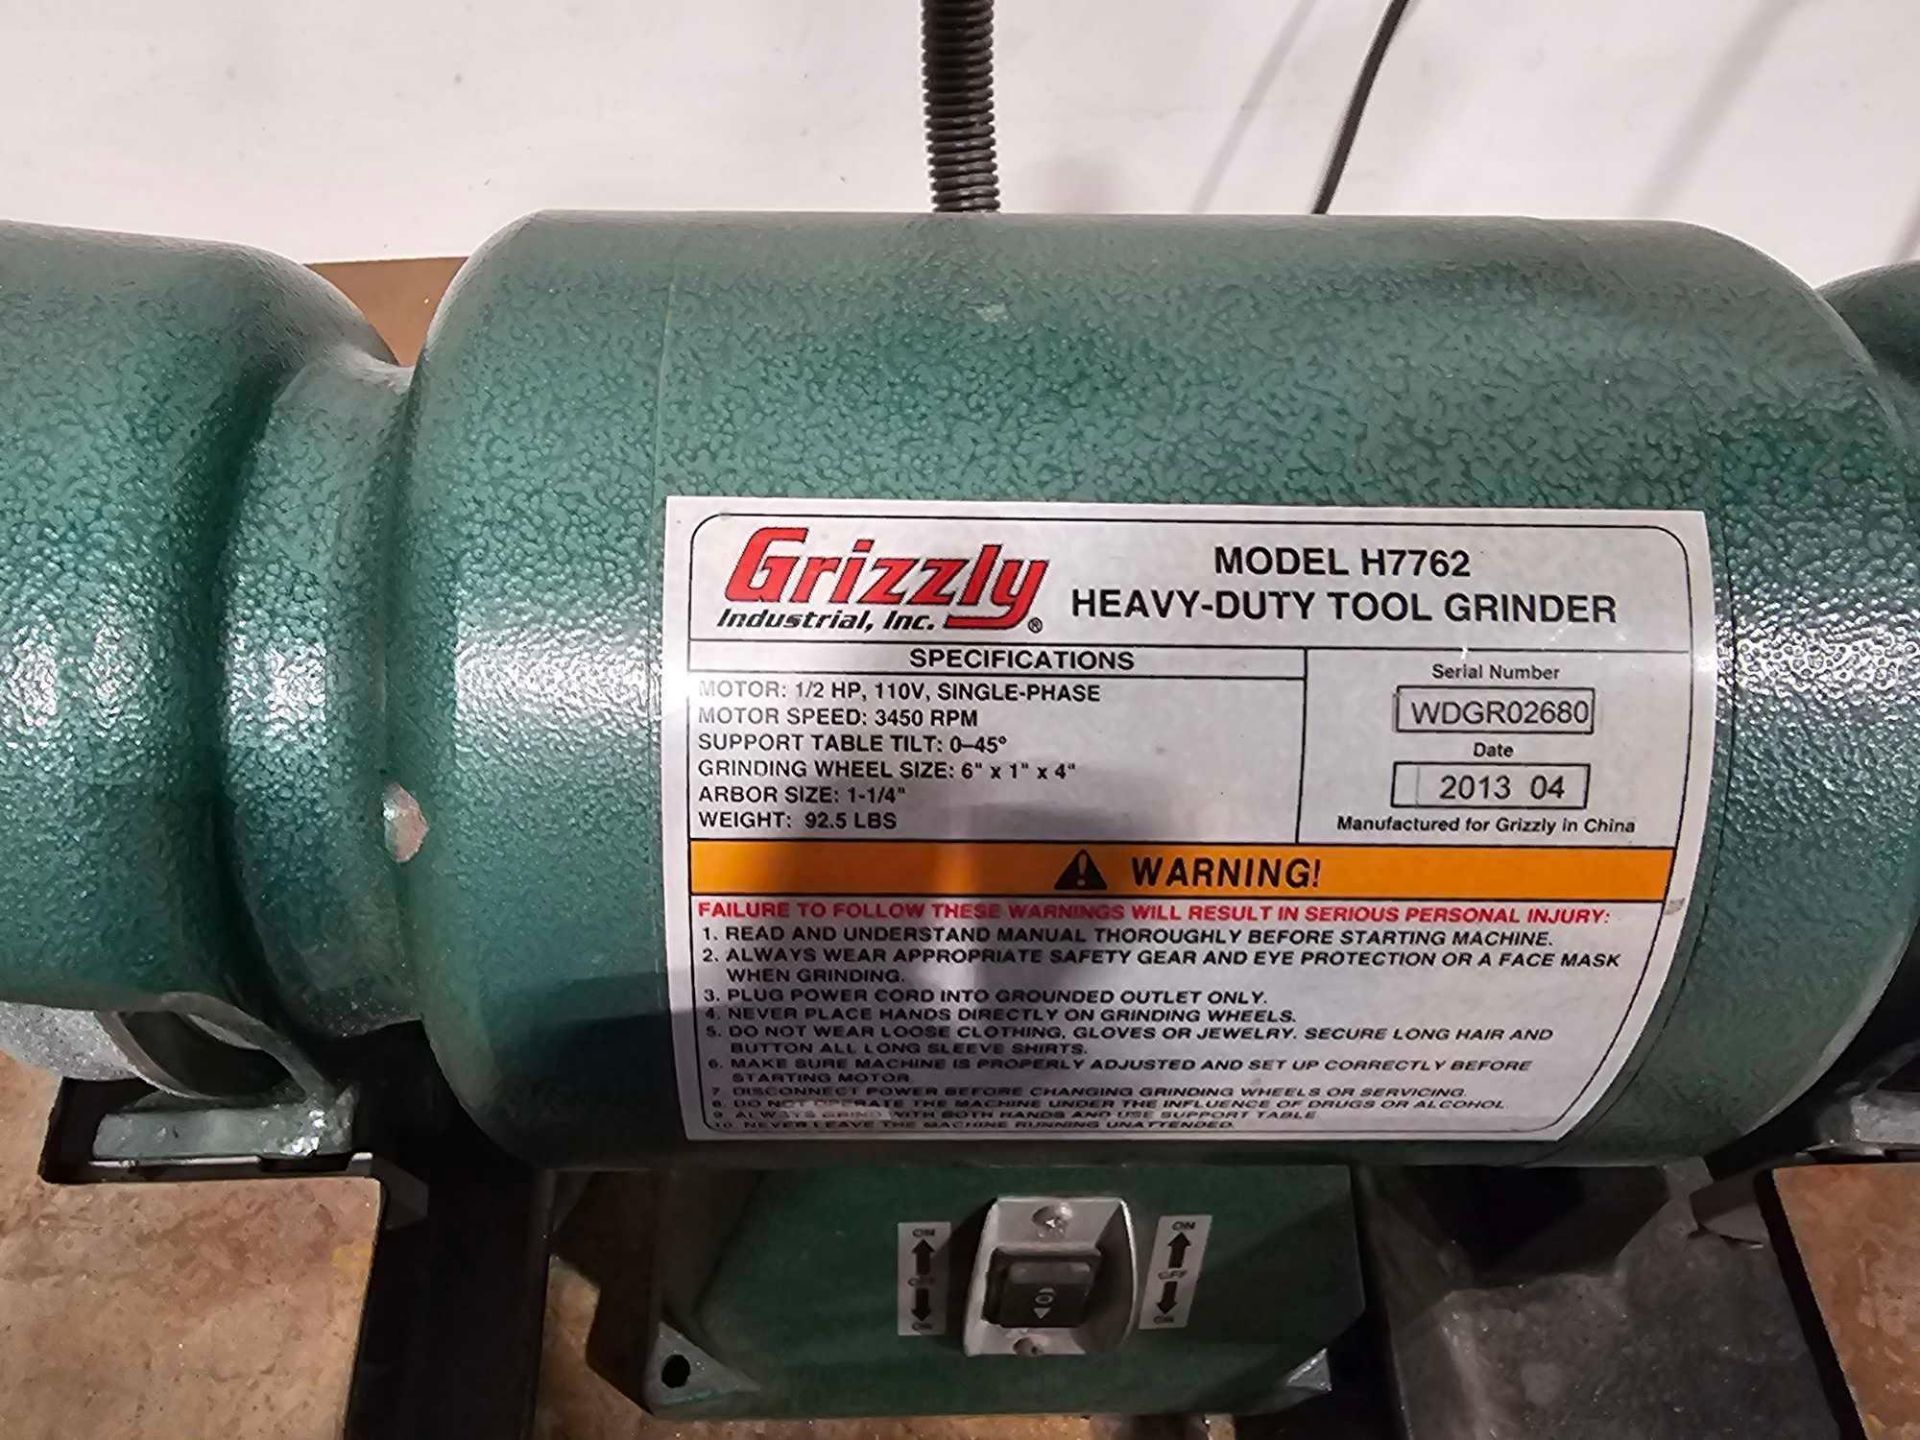 GRIZZLY HEAVY DUTYTOOL GRINDER MODEL H7762 1/2 HP - Image 9 of 9